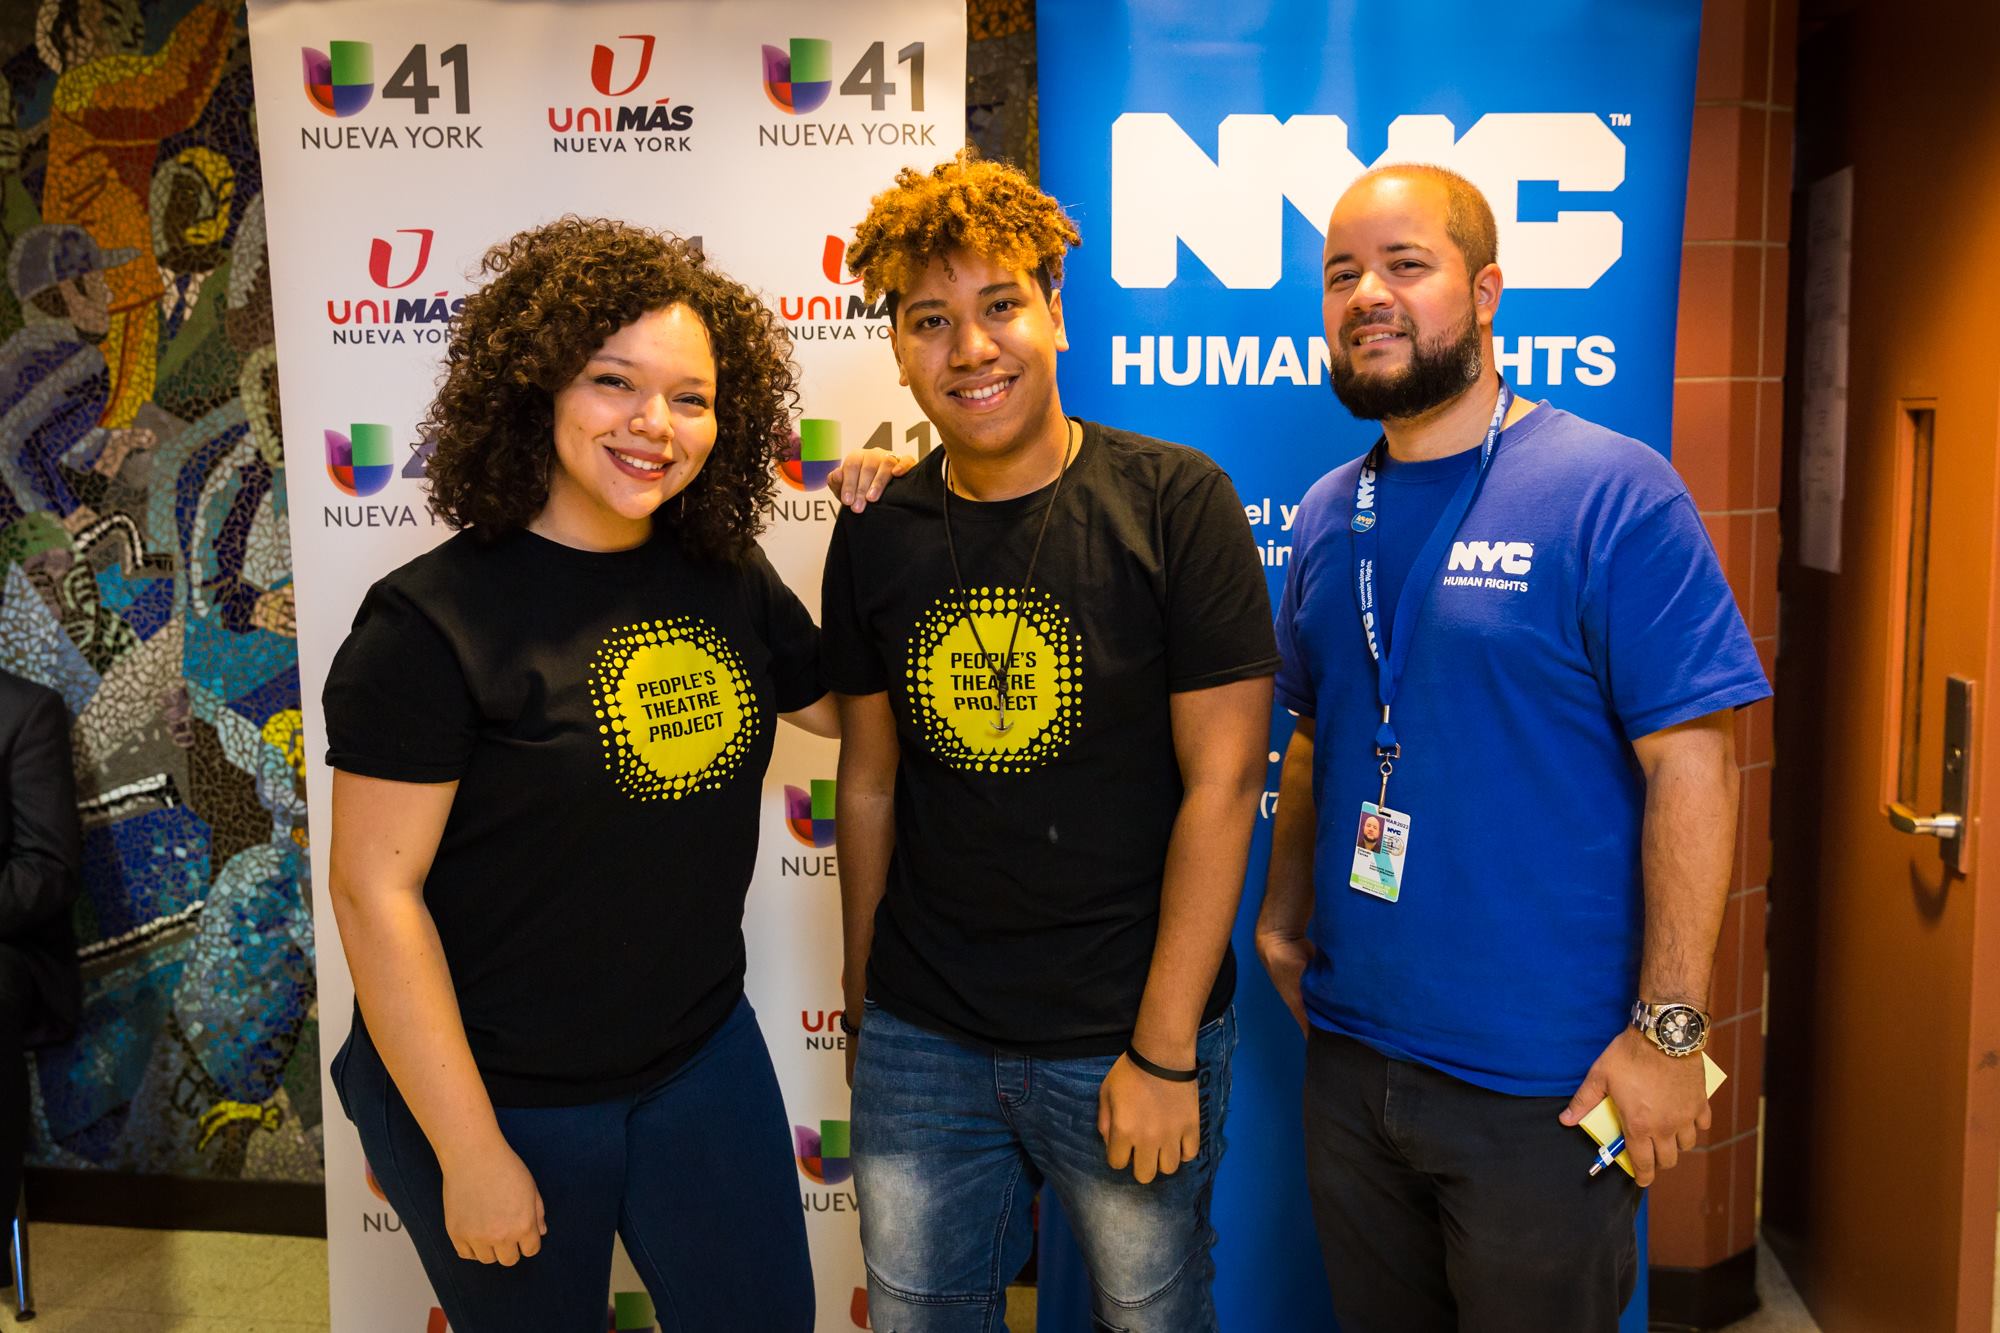 Three people posing for camera; two people are wearing “People’s Theater Project” t-shirts, and one person is wearing “NYC Human Rights” t-shirt.